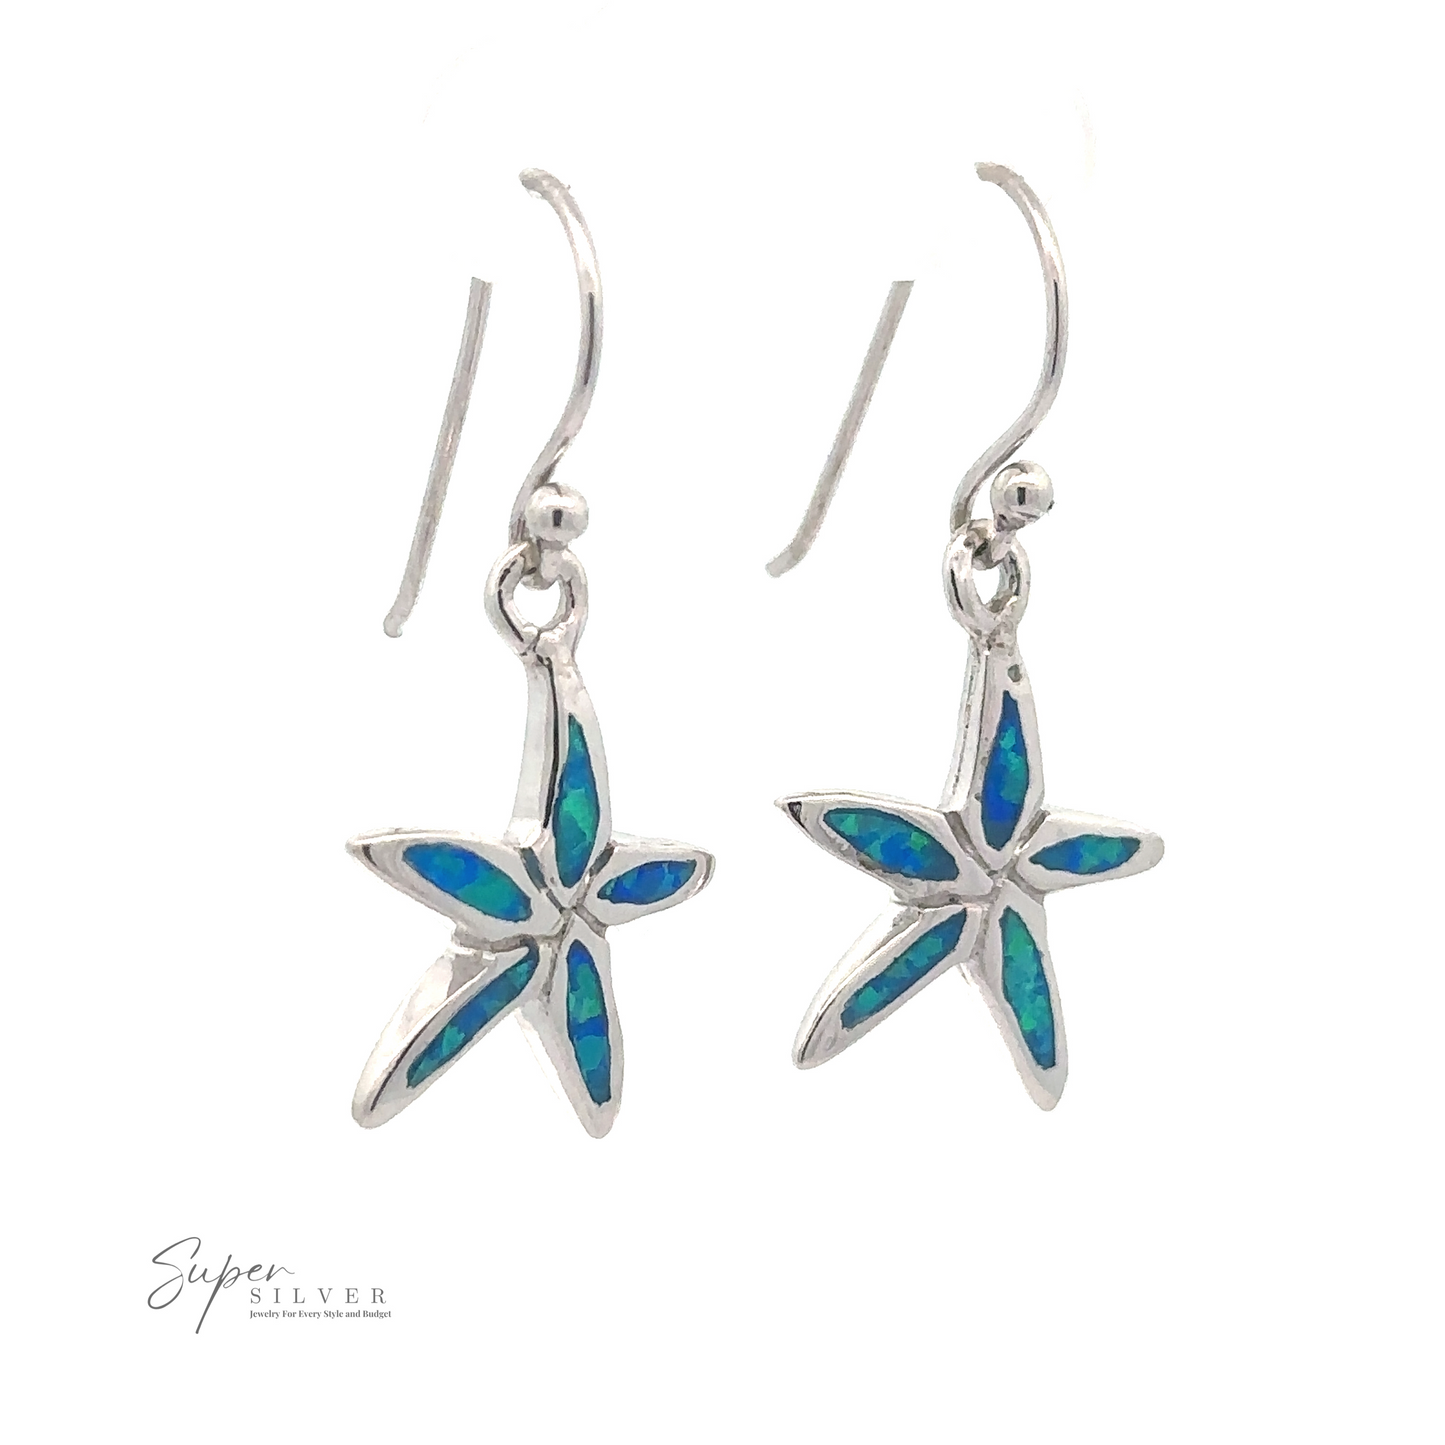 A pair of Lab-Created Opal Star Fish Earrings made of sterling silver with dazzling blue-green inlays, hanging from hooks. The logo "Super Silver" is visible at the bottom left.